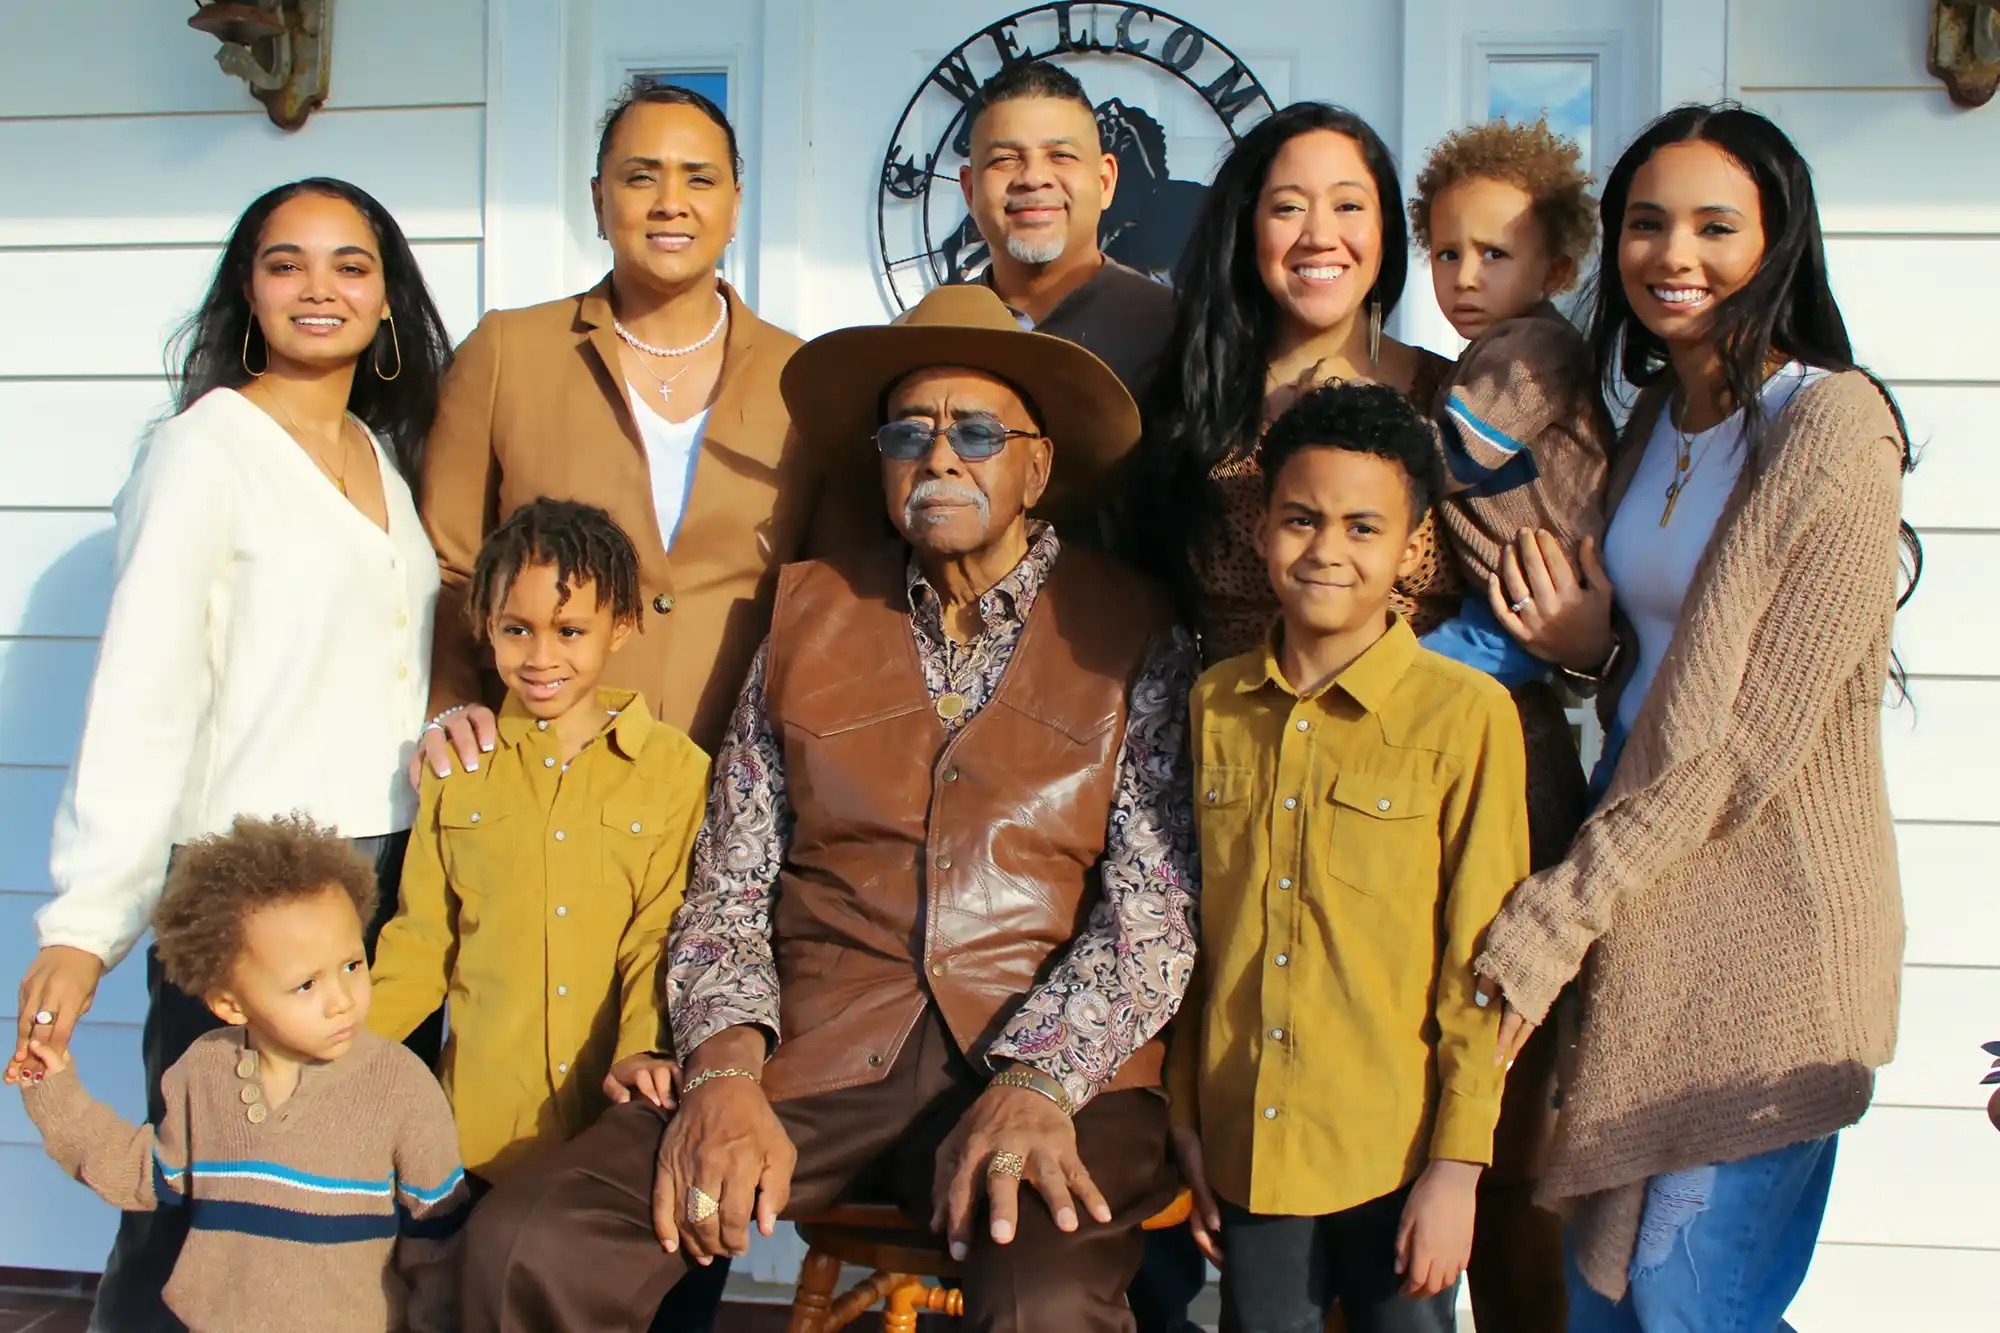 Giant family portrait, showing three or four generations of people with the grandpa in the middle. Showing legacy.